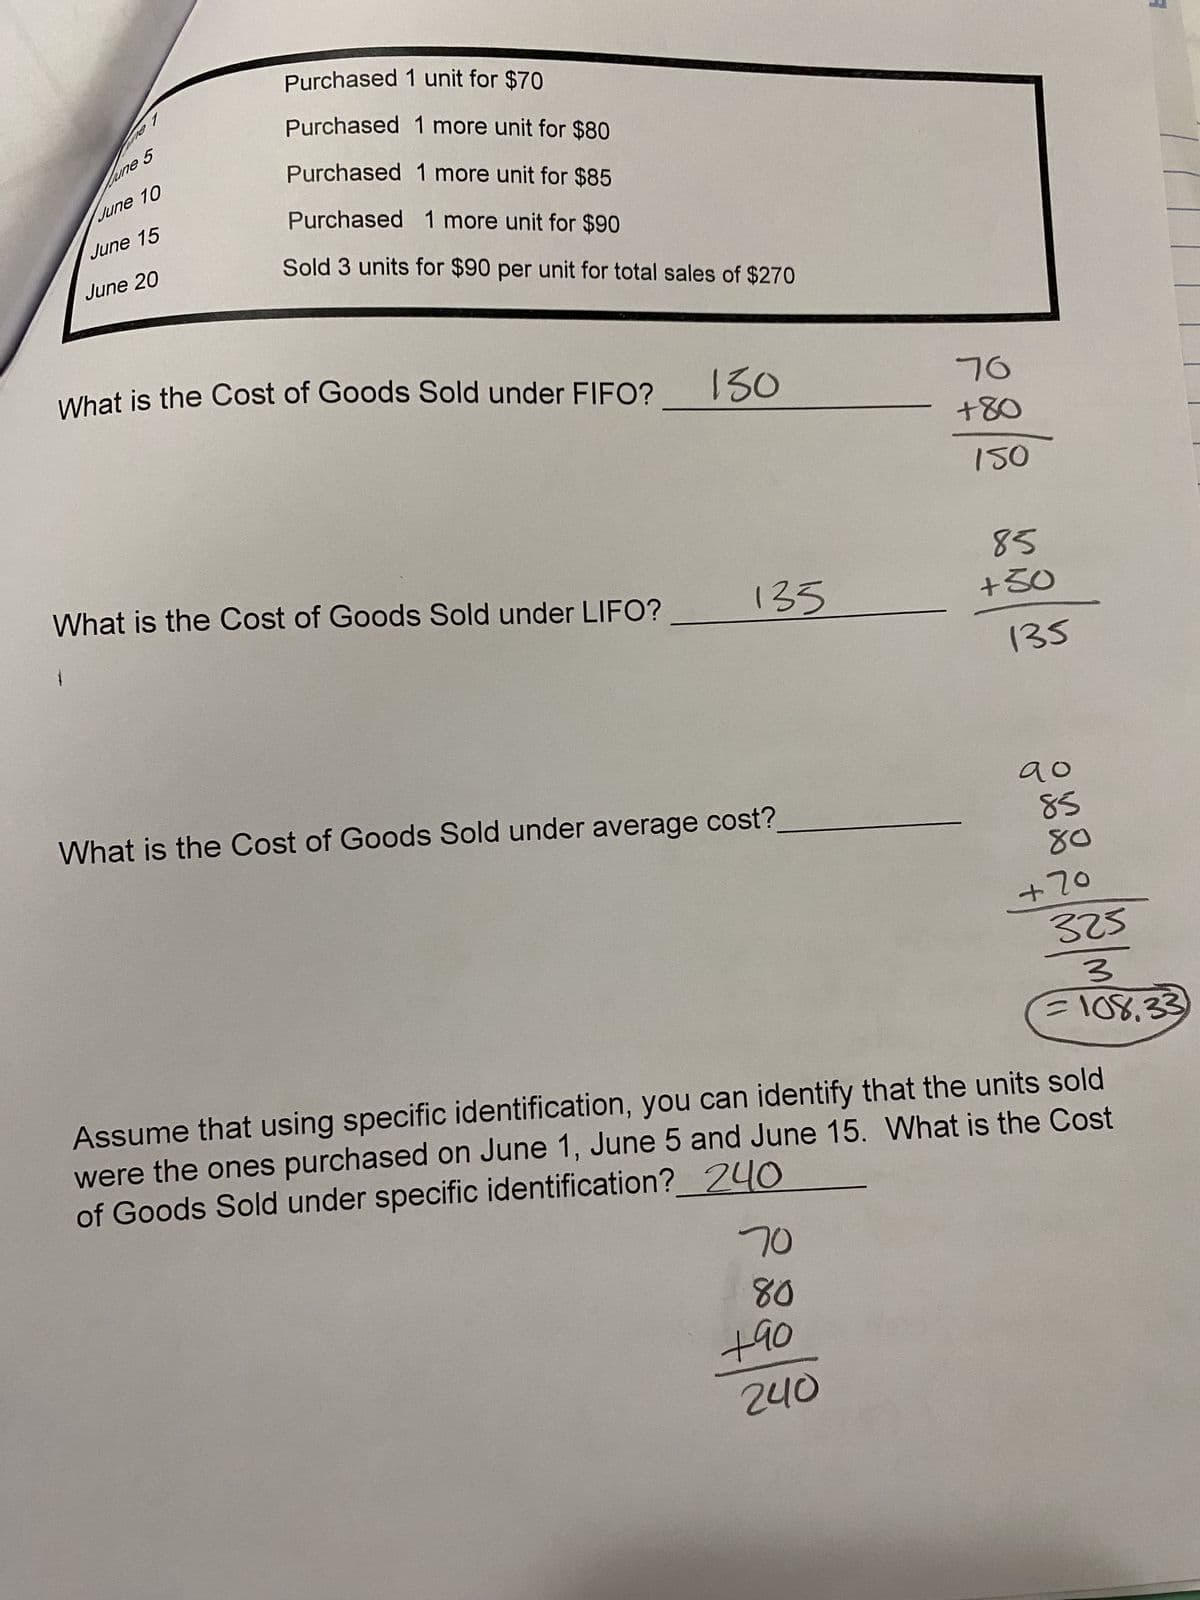 1
June 5
June 10
June 15
June 20
Purchased 1 unit for $70
Purchased 1 more unit for $80
Purchased 1 more unit for $85
Purchased 1 more unit for $90
Sold 3 units for $90 per unit for total sales of $270
What is the Cost of Goods Sold under FIFO?
What is the Cost of Goods Sold under LIFO?
130
135
What is the Cost of Goods Sold under average cost?
70
80
+90
76
+80
150
240
85
+50
135
до
85
80
+70
Assume that using specific identification, you can identify that the units sold
were the ones purchased on June 1, June 5 and June 15. What is the Cost
of Goods Sold under specific identification?
240
A
325
3
= 108.33